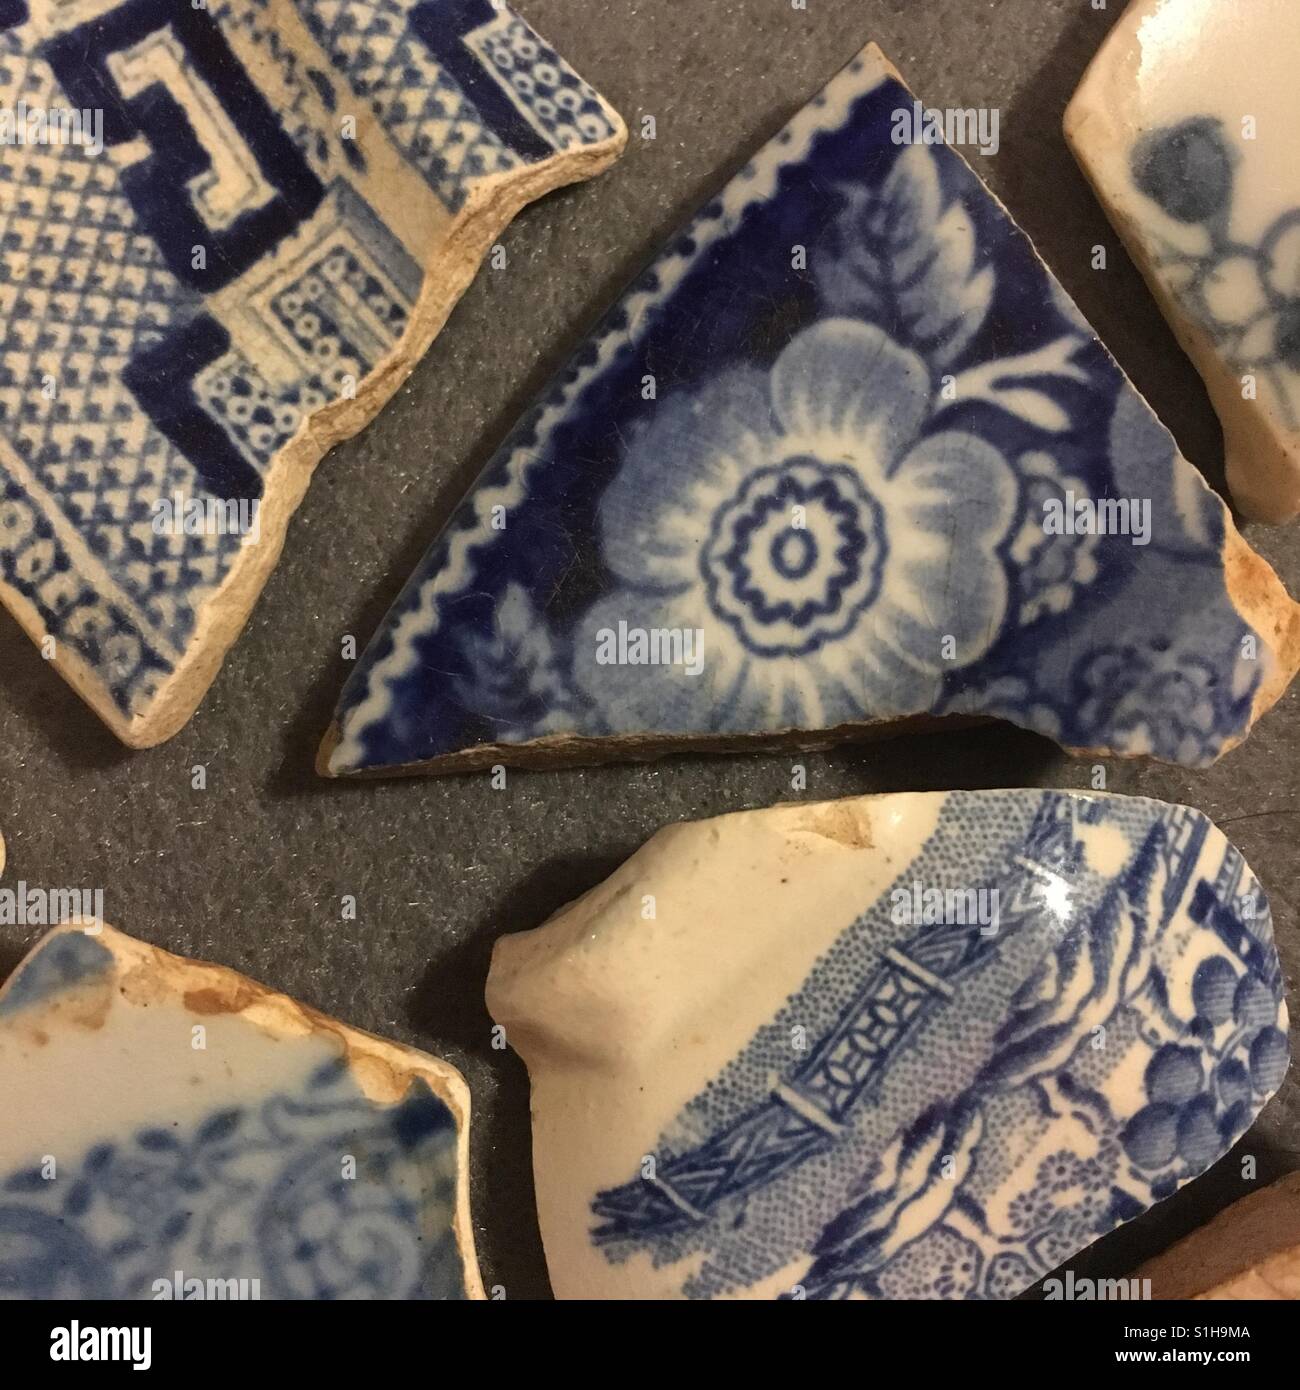 Shards of blue and white China found in the river ranging from early to late Victorian period arranged in shadow box Stock Photo